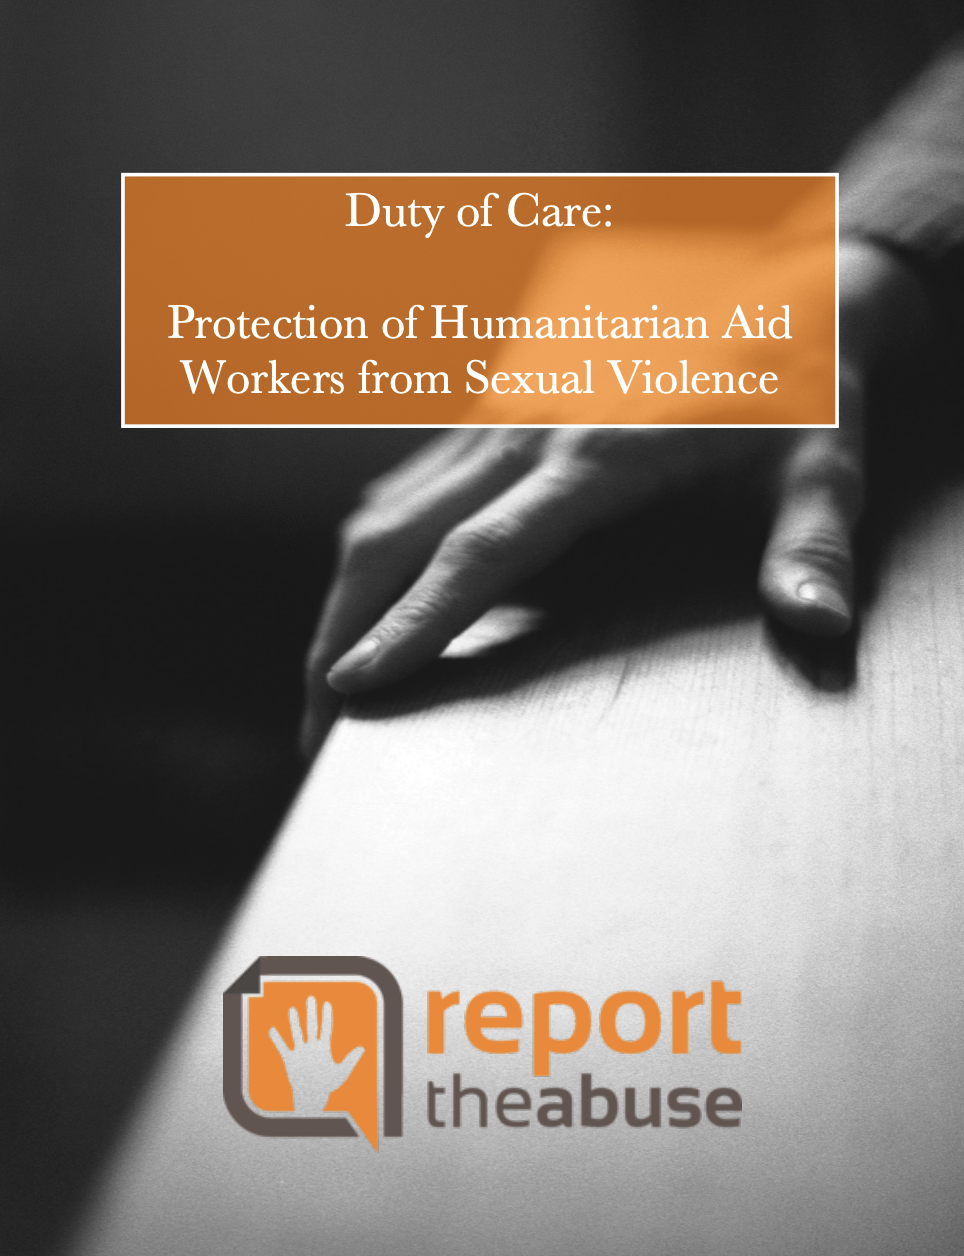 Duty of Care: Protection of Humanitarian Aid Workers from Sexual Violence